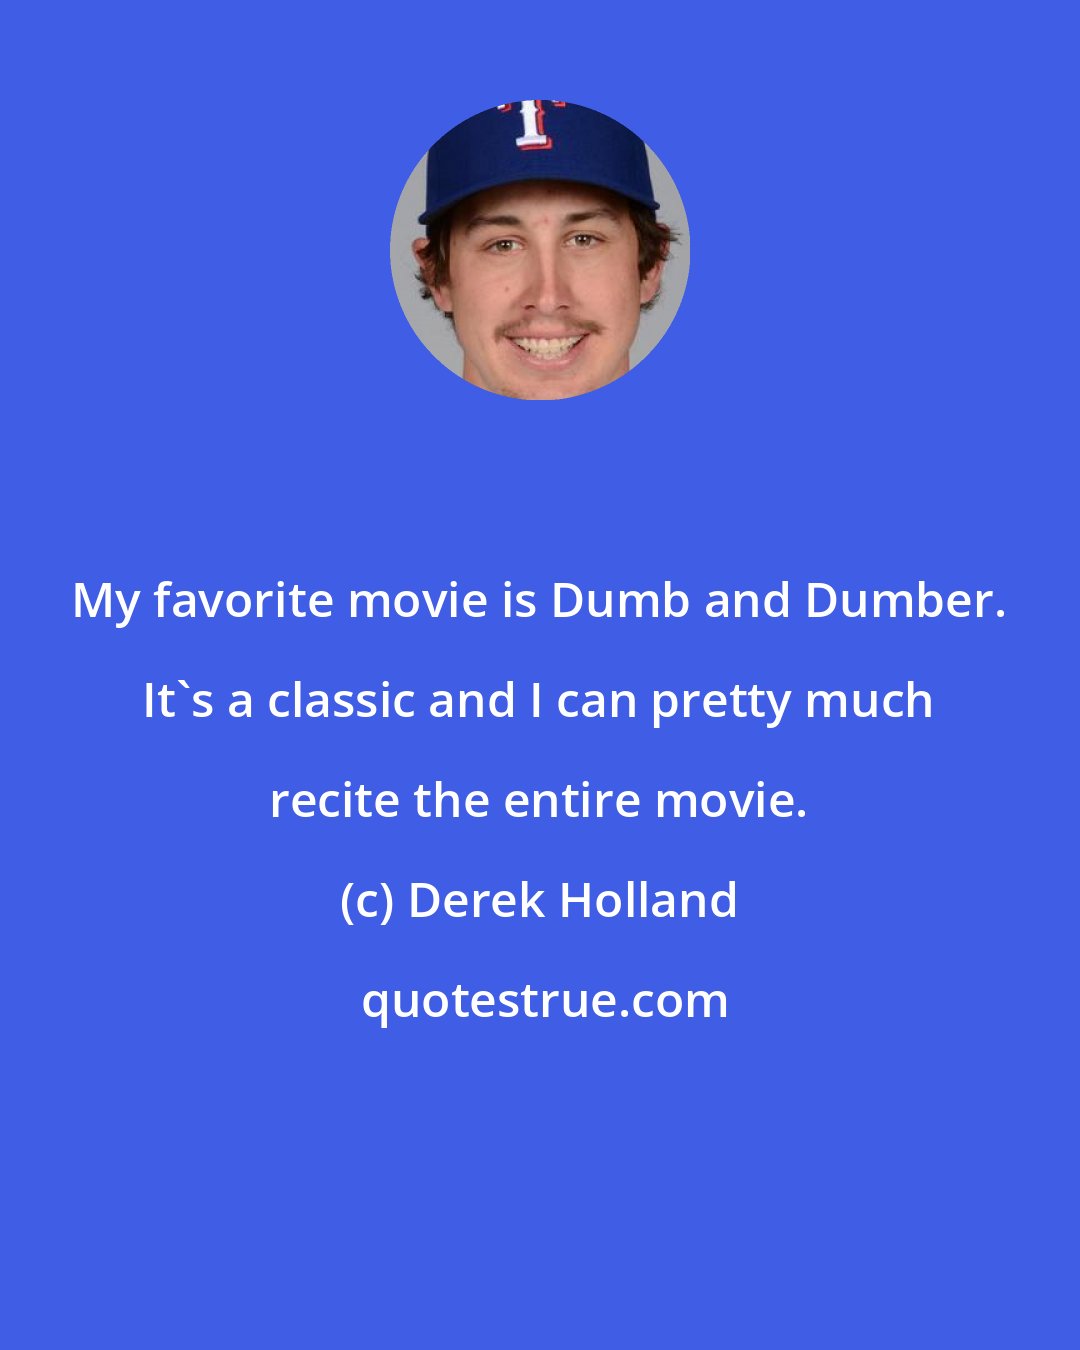 Derek Holland: My favorite movie is Dumb and Dumber. It's a classic and I can pretty much recite the entire movie.